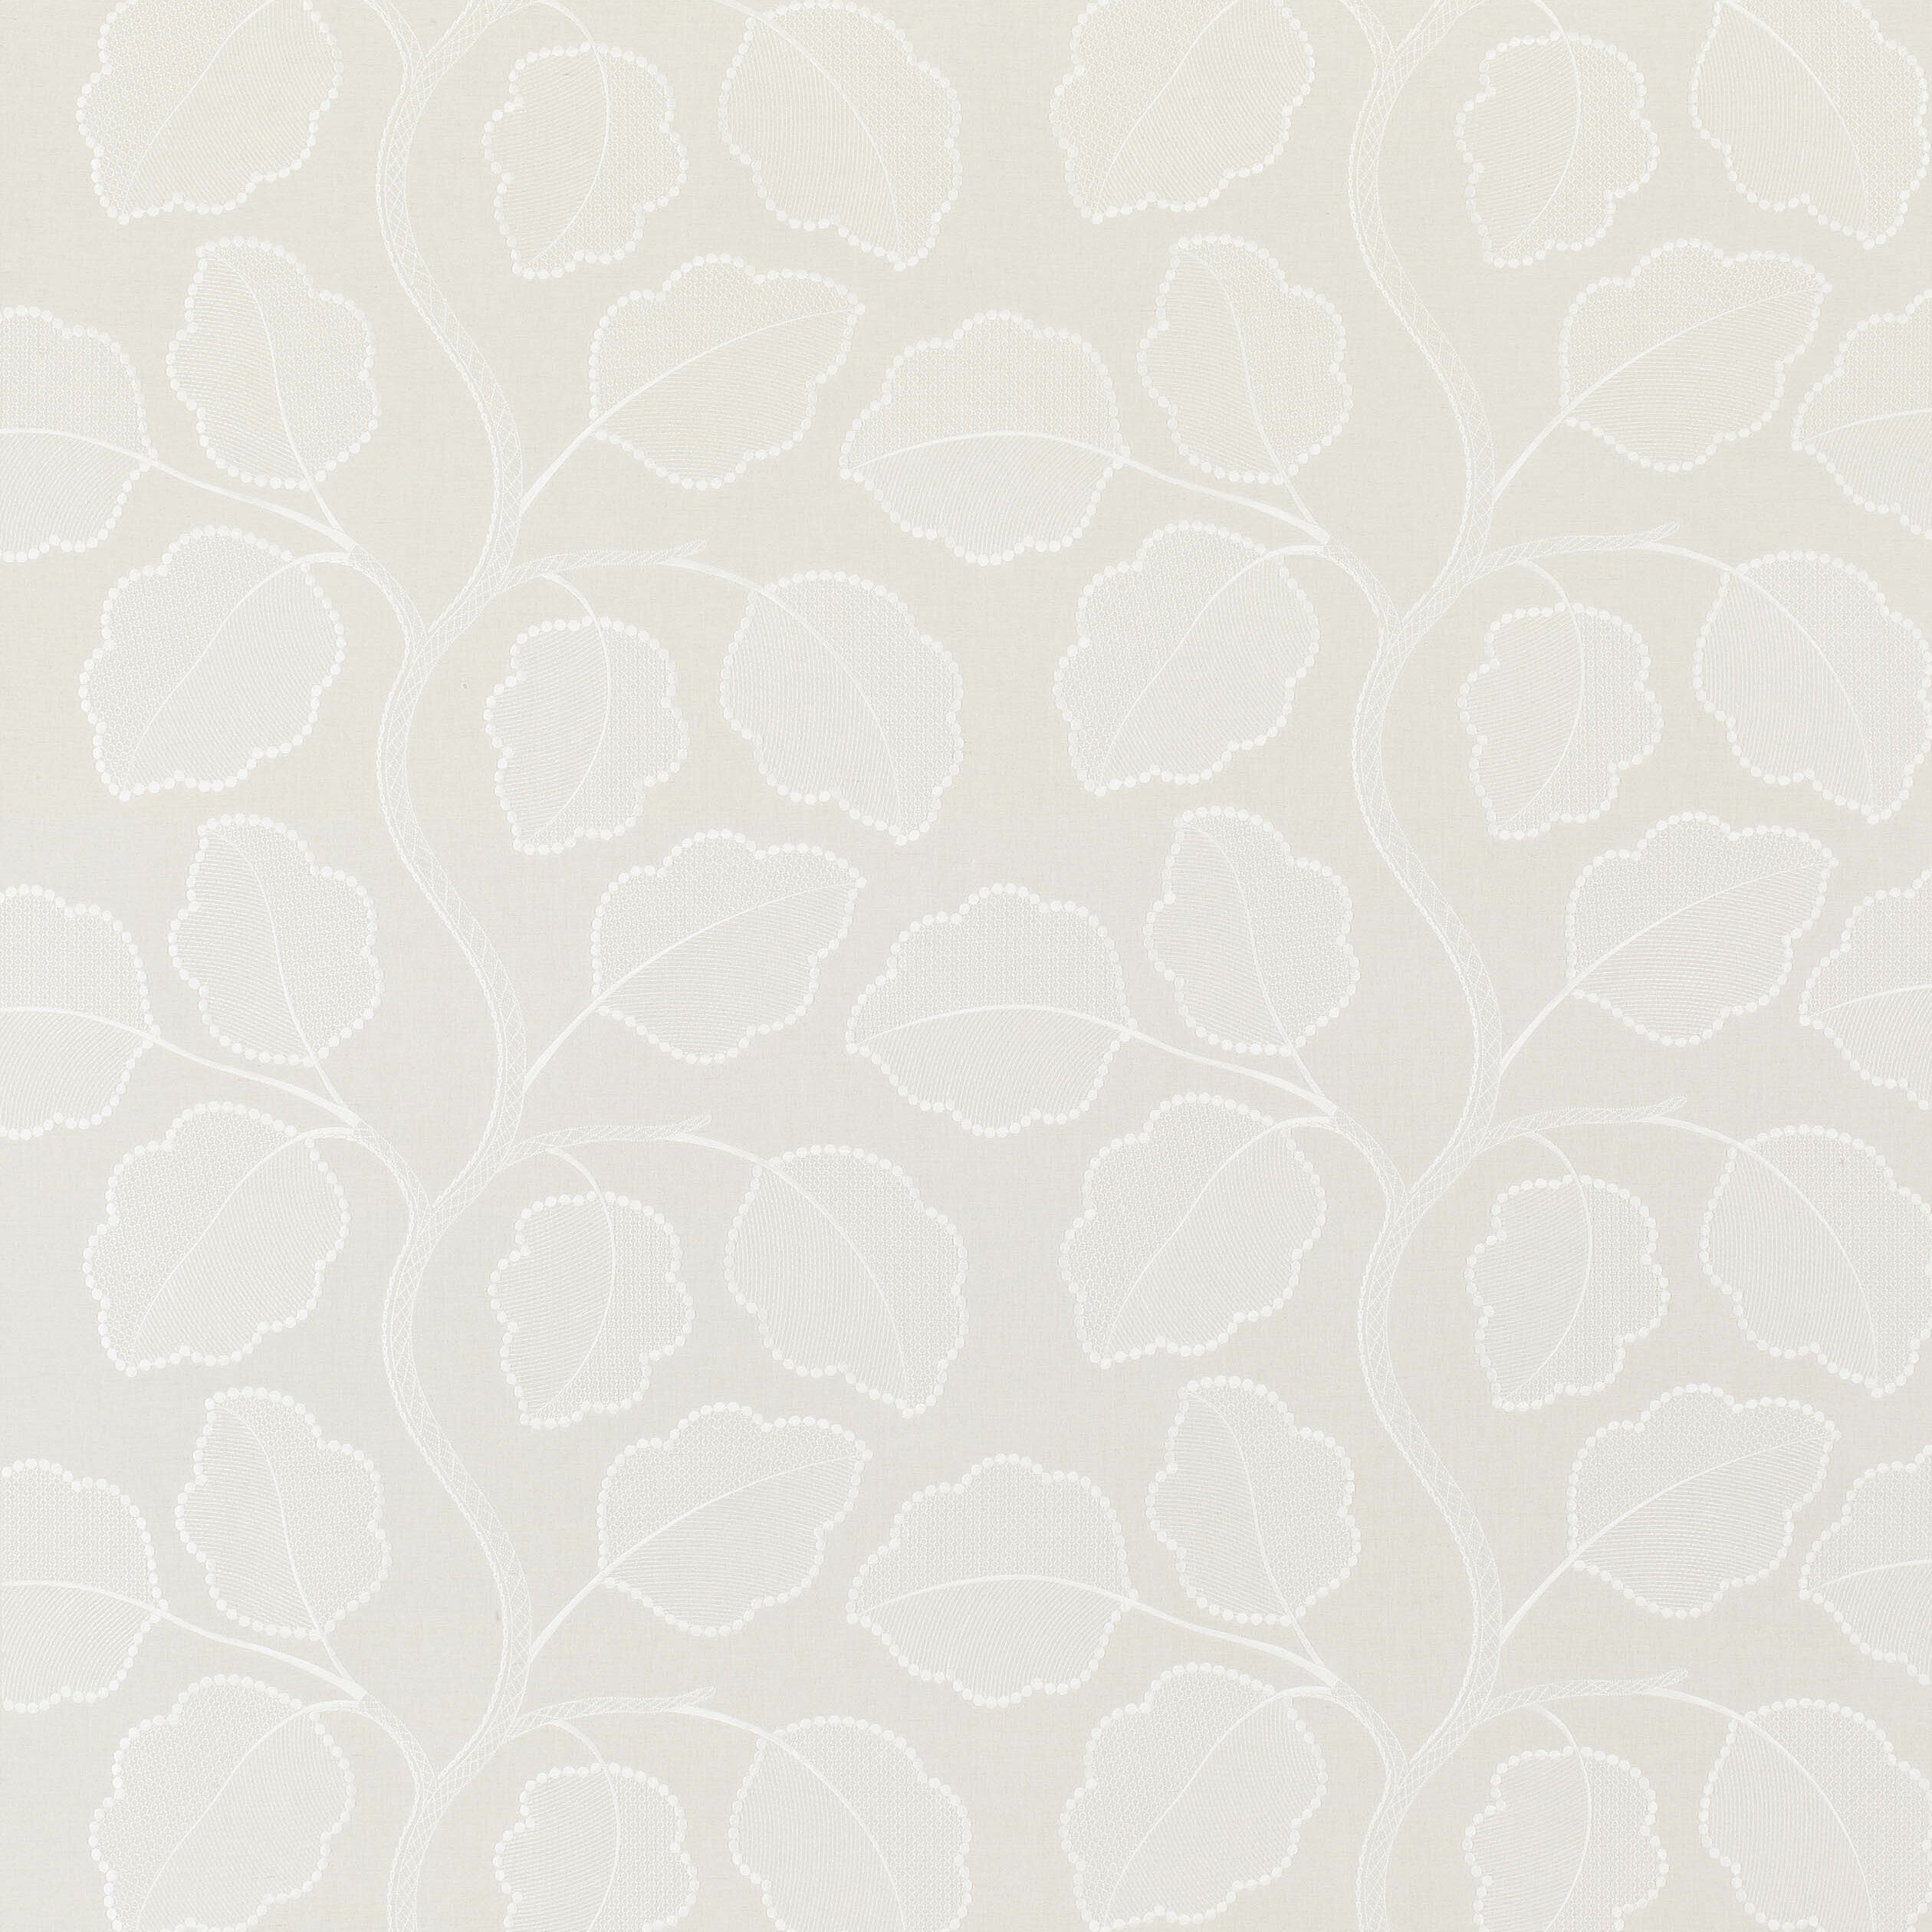 Chestnut Tree Embroidery fabric in white color - pattern number AW9121 - by Anna French in the Natural Glimmer collection